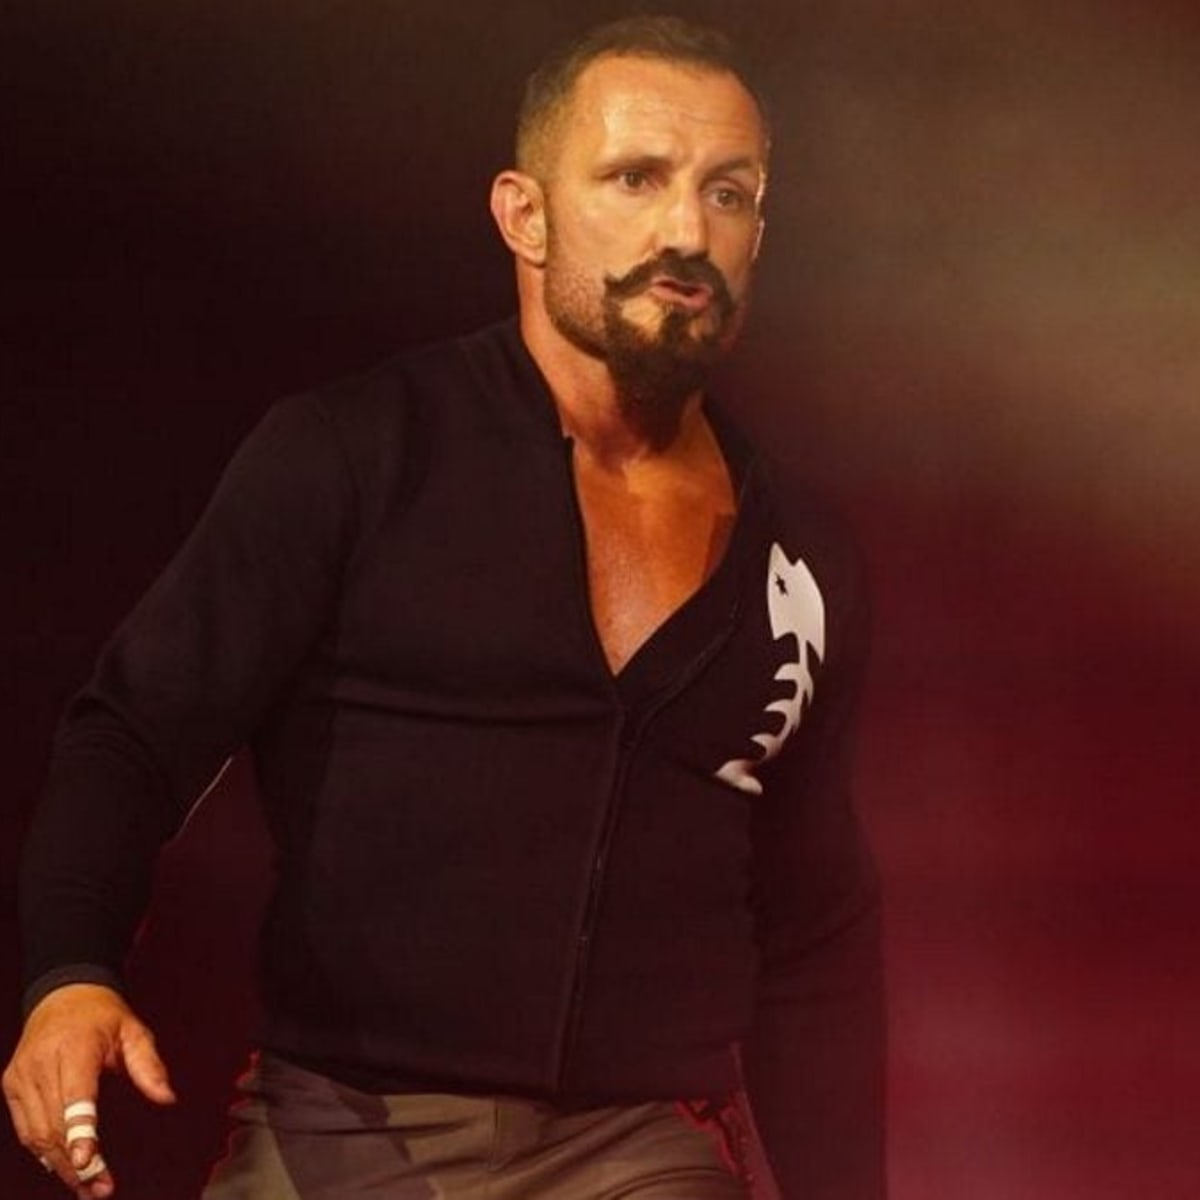 Shawn Spears On Why He's Back In NXT: I Get To Be Home In My Bed